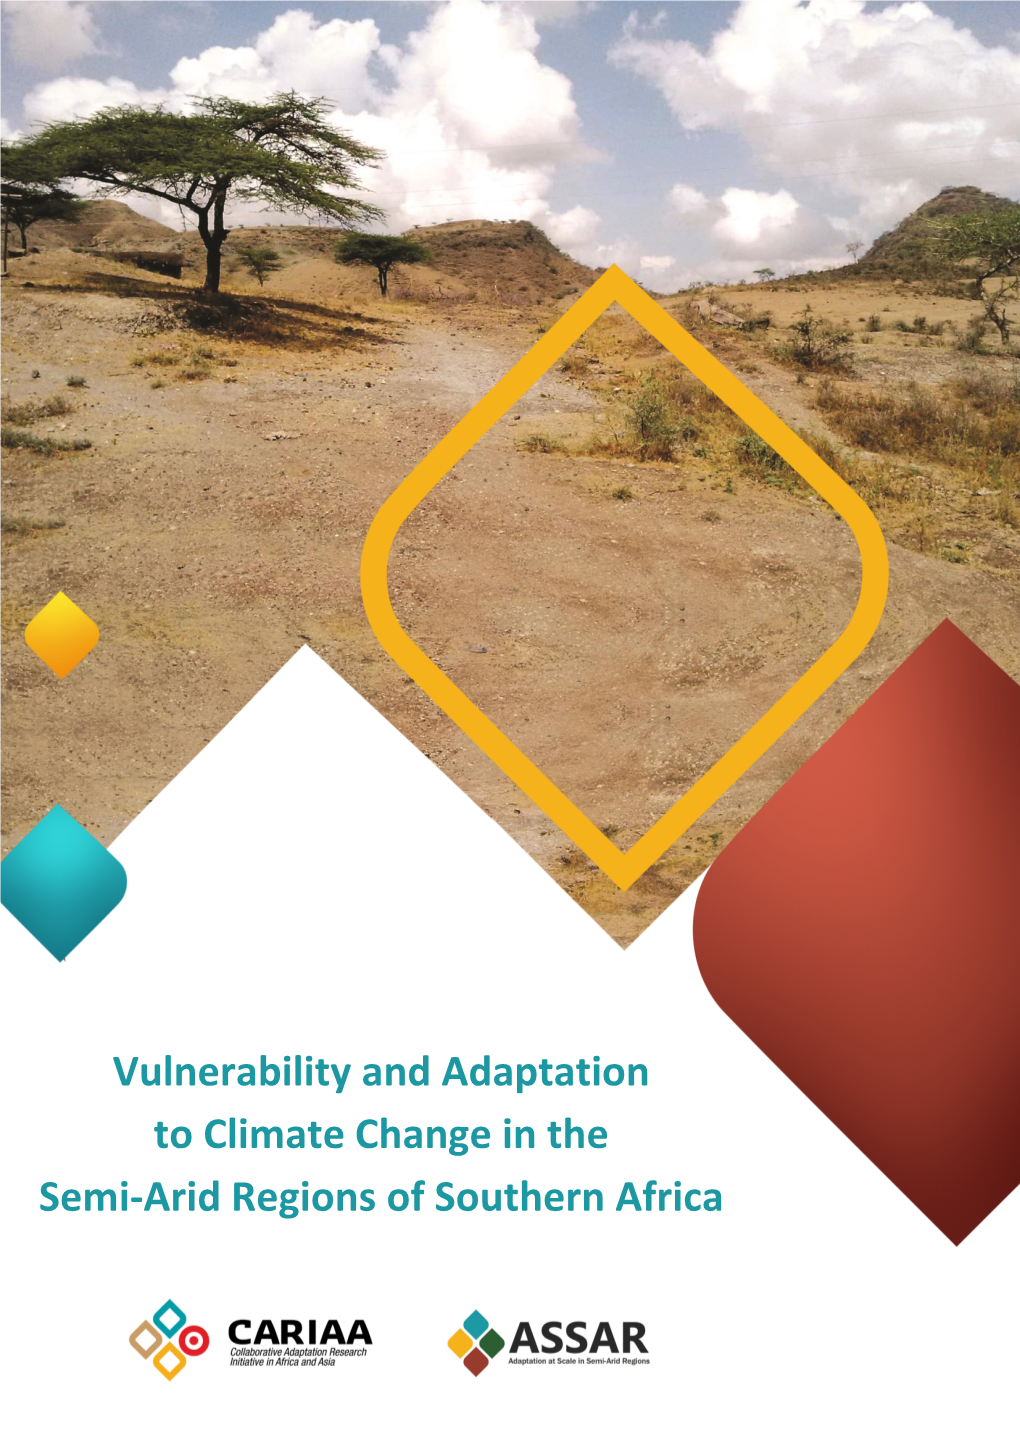 Vulnerability and Adaptation to Climate Change in the Semi-Arid Regions of Southern Africa